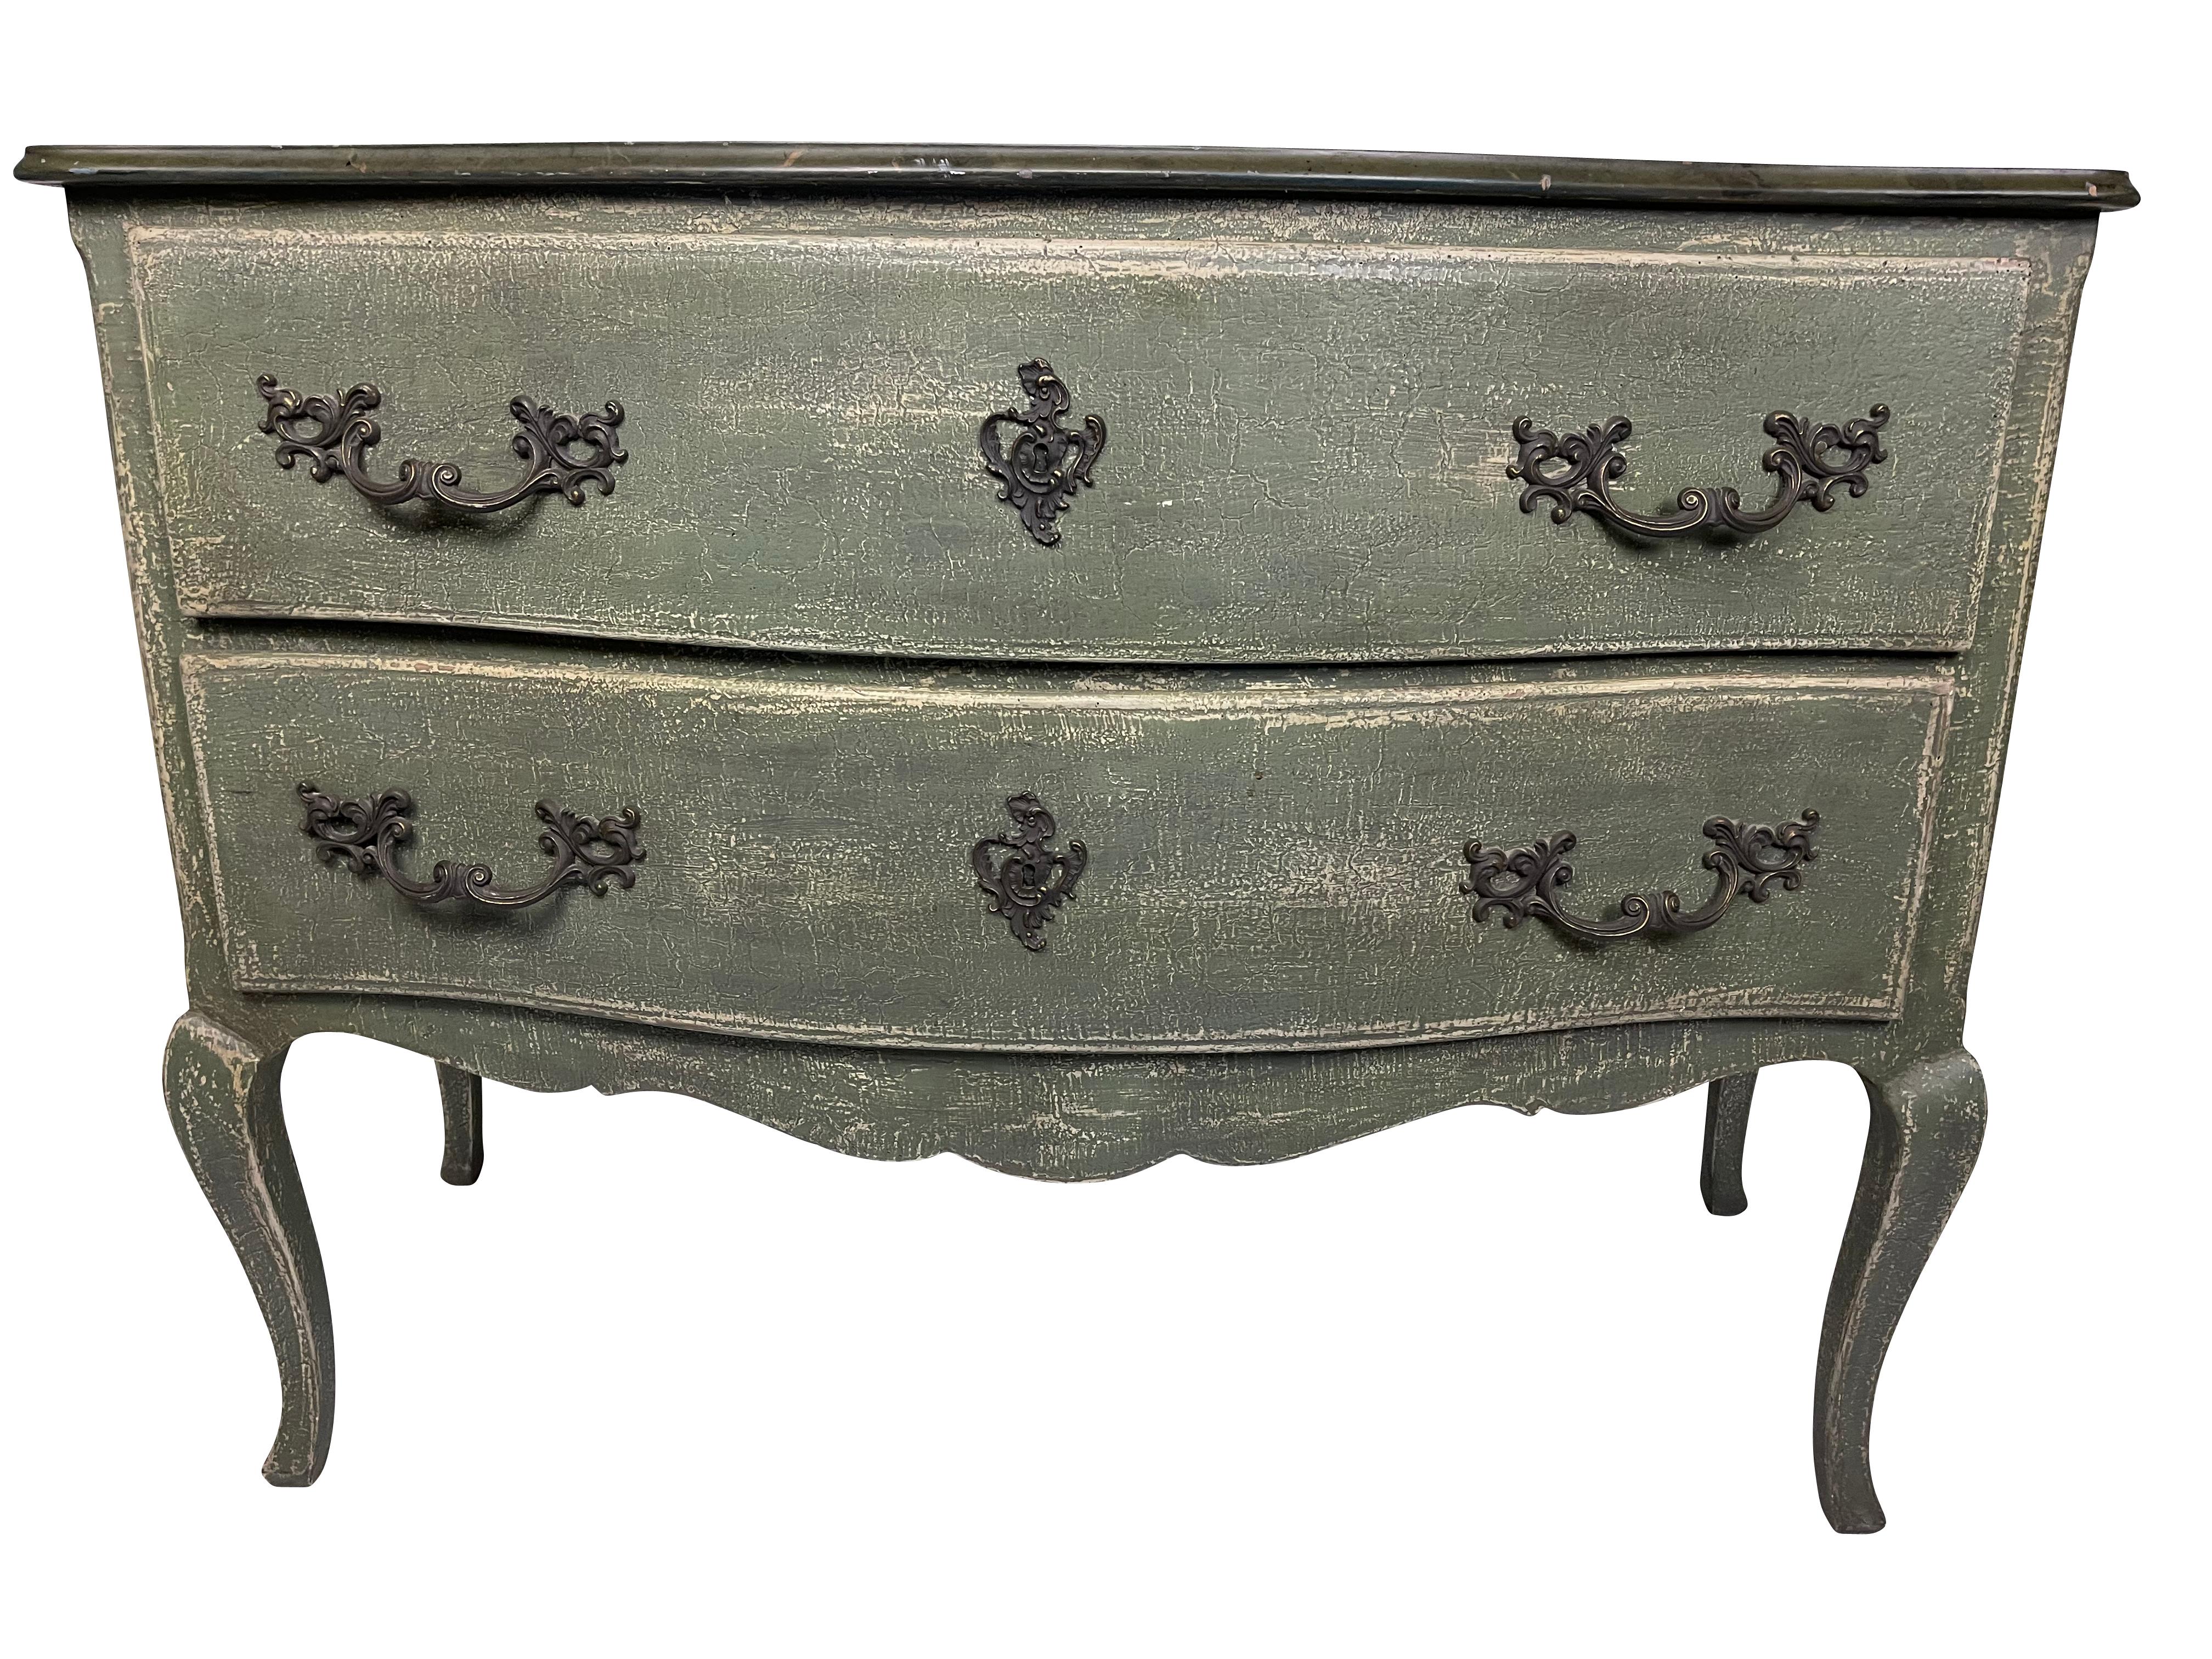 French Louis XV style two drawer blue/green crackle painted two drawer bureau. Fancy metal pulls and key holes. Graceful turned legs. Measures 49 X 34 X 22.